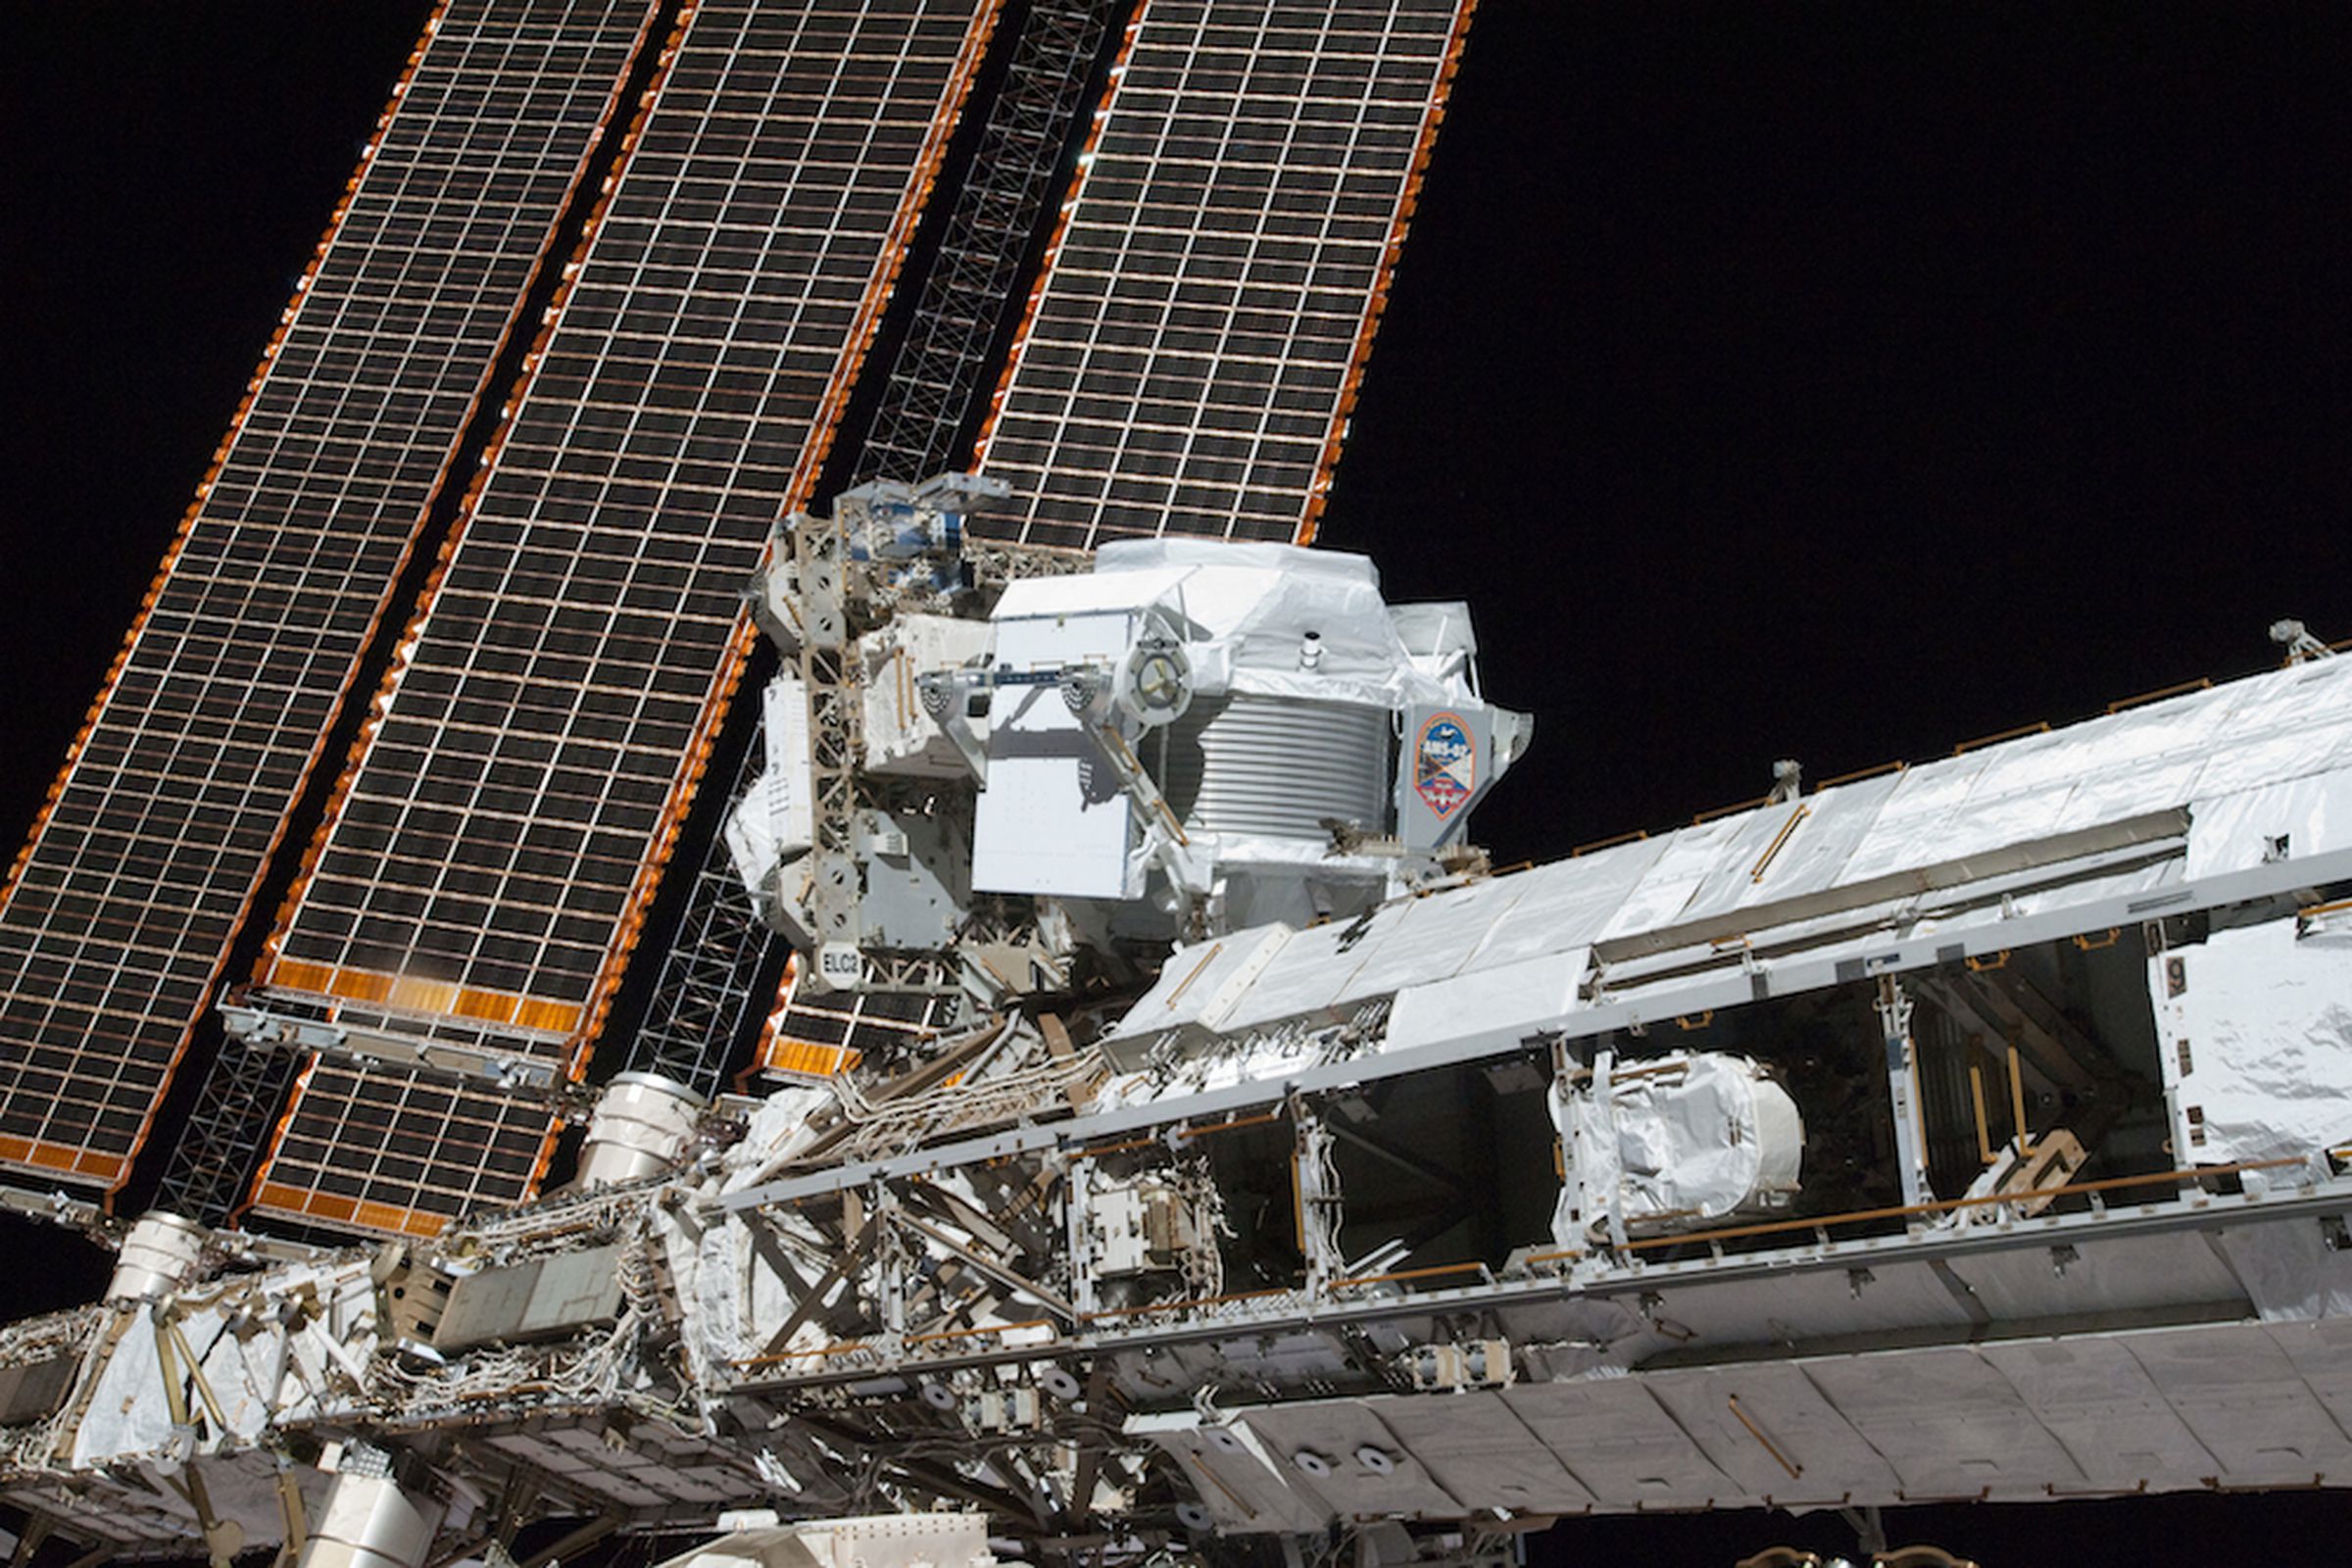 Dark matter hunting AMS experiment on International Space Station